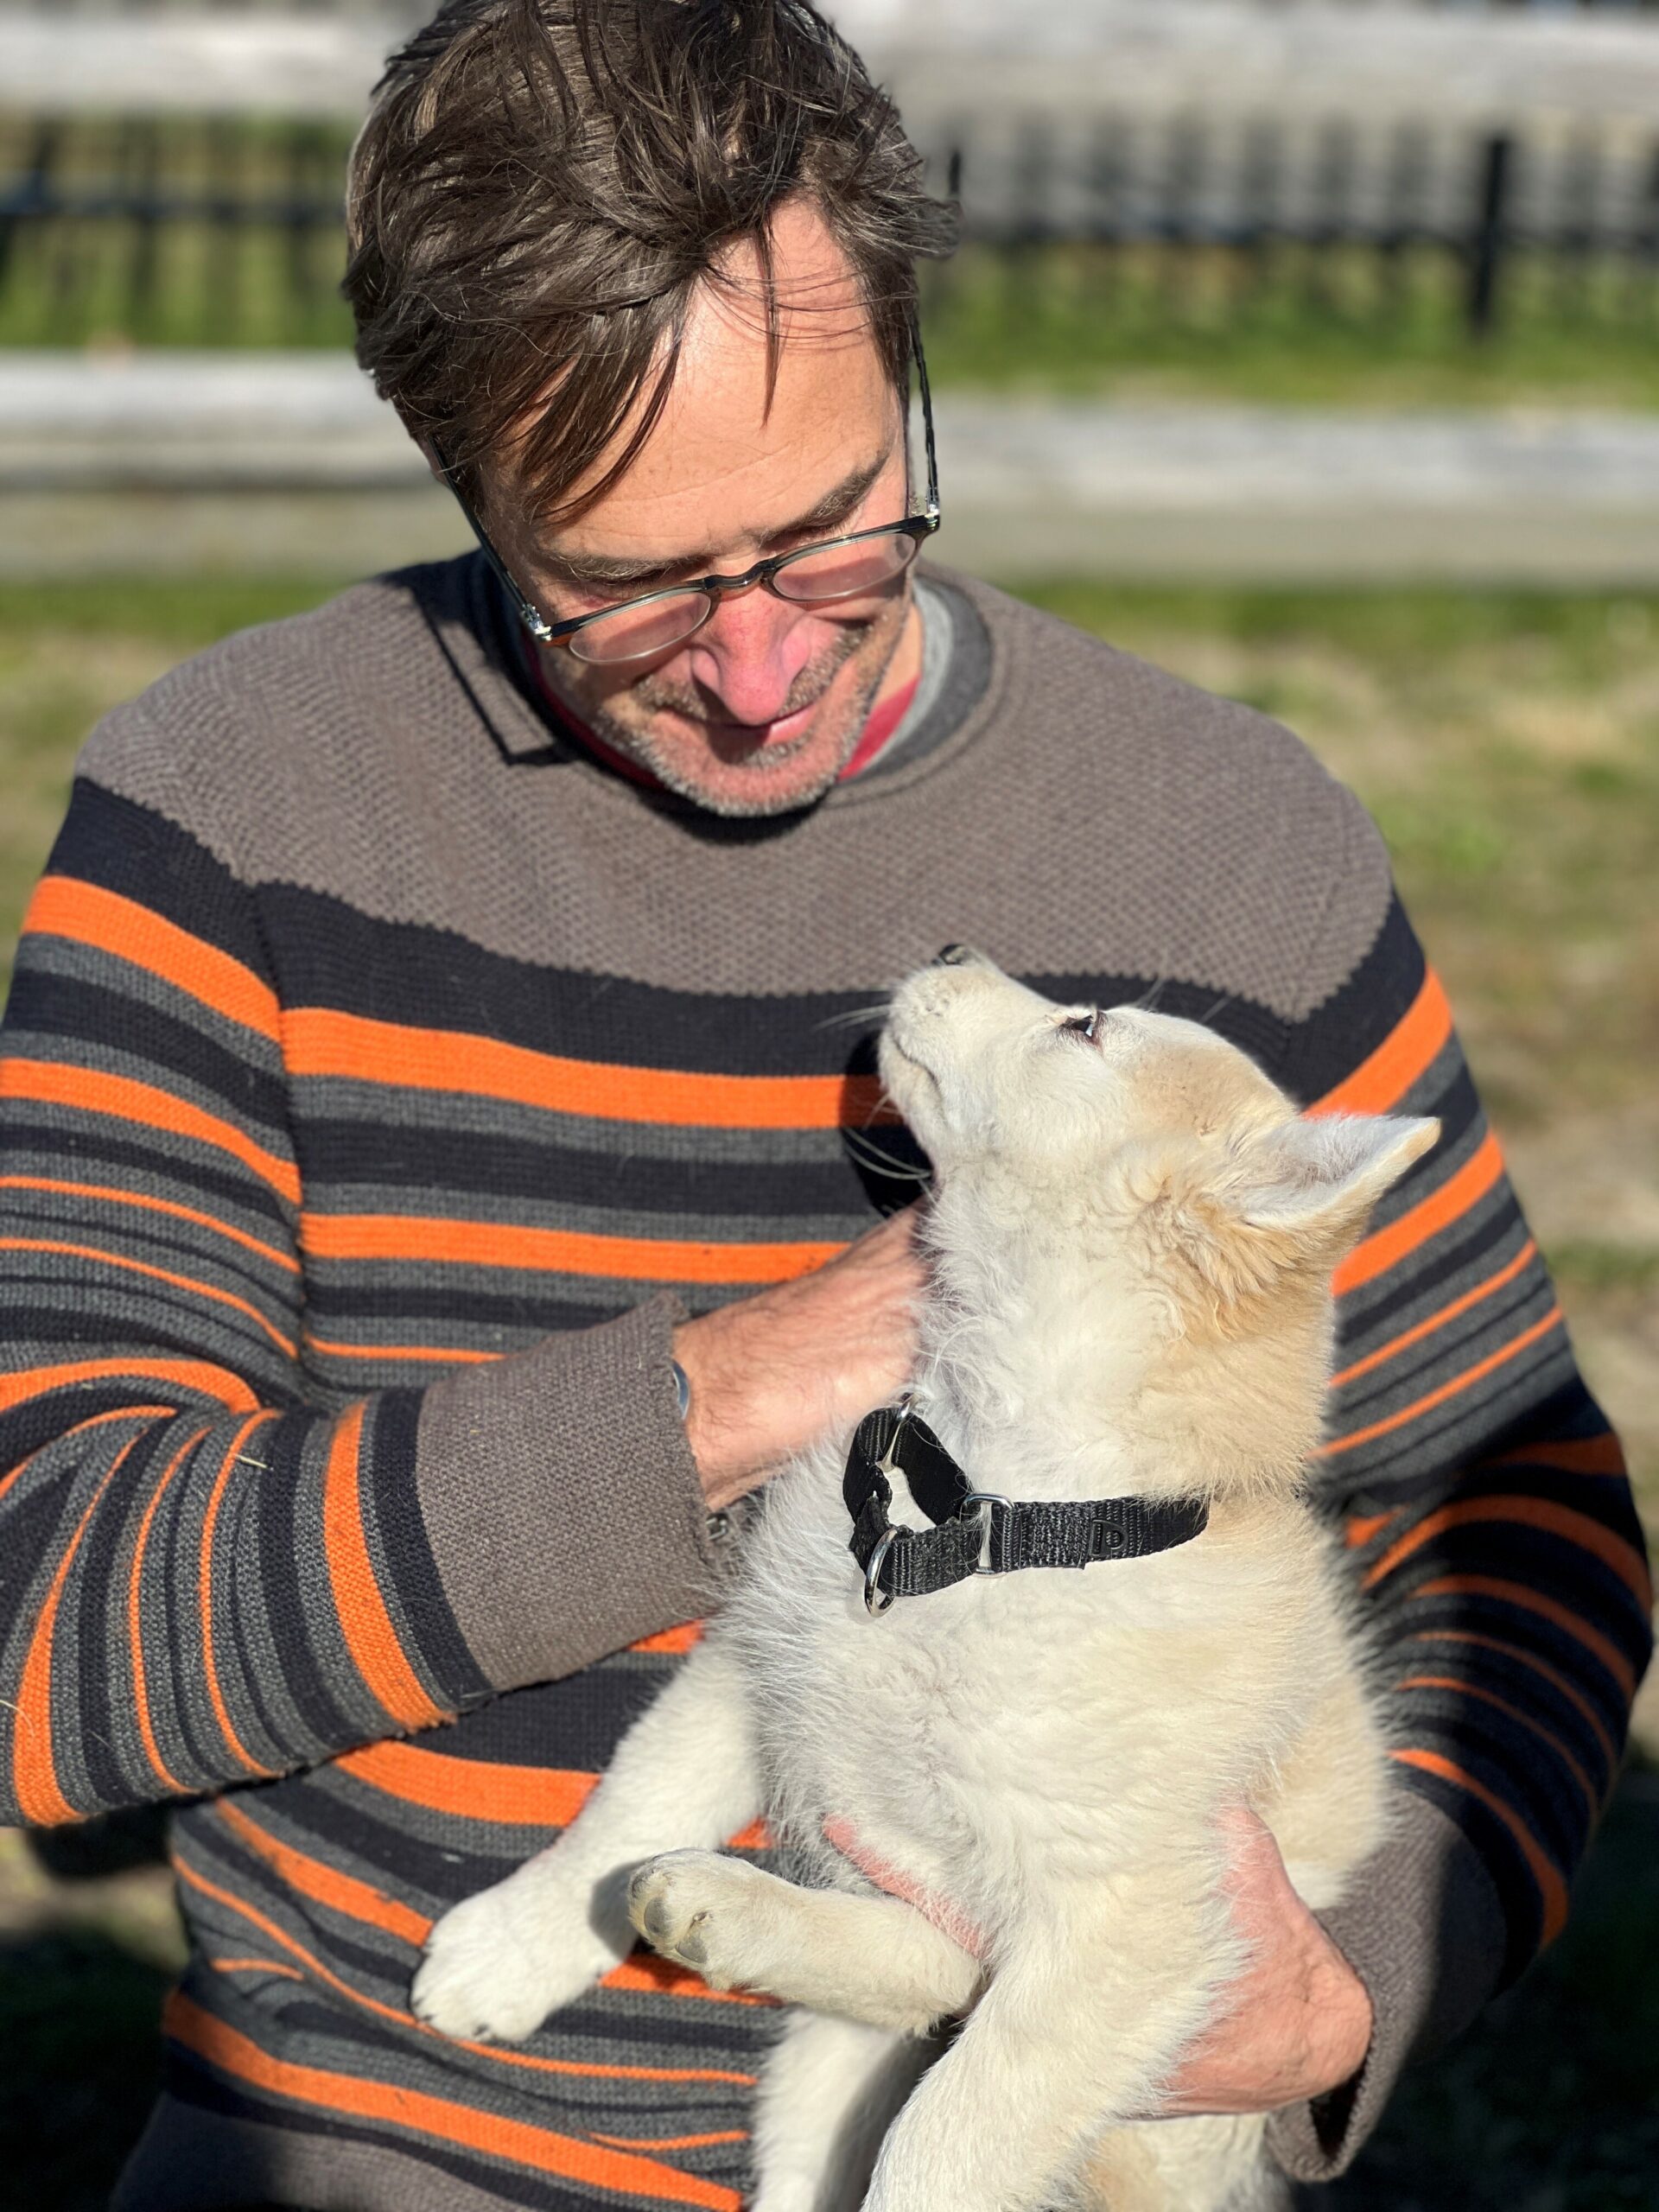 Dr. George Dempsey and Biscochito. COURTESY ANIMAL RESCUE FUND OF THE HAMPTONS